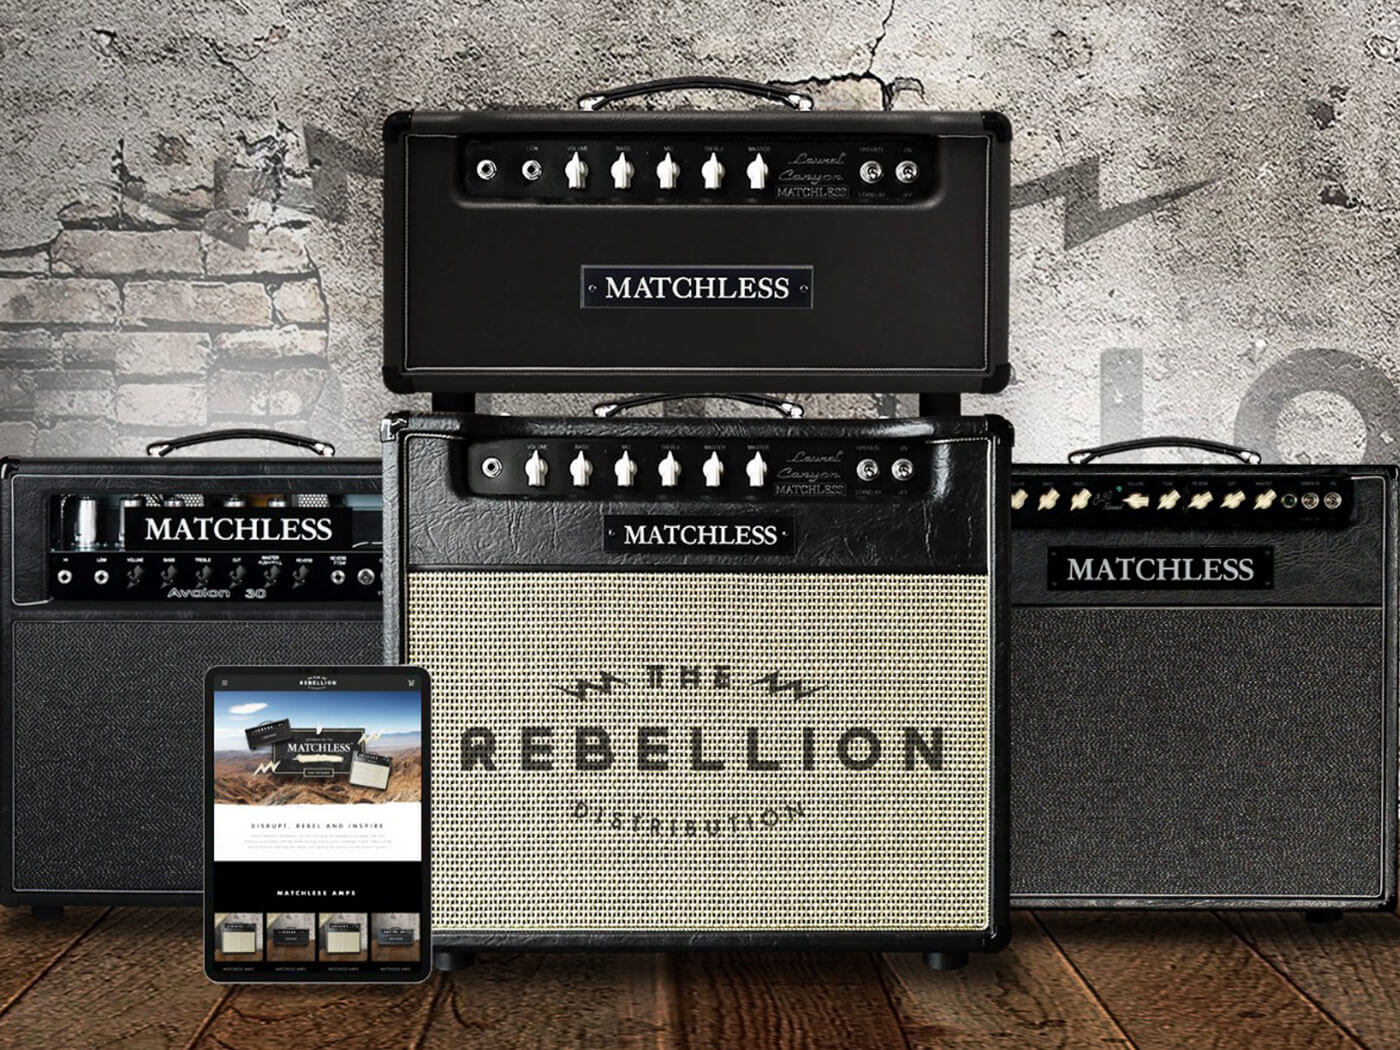 Matchless Amplifiers has partnered with Rebellion Distribution